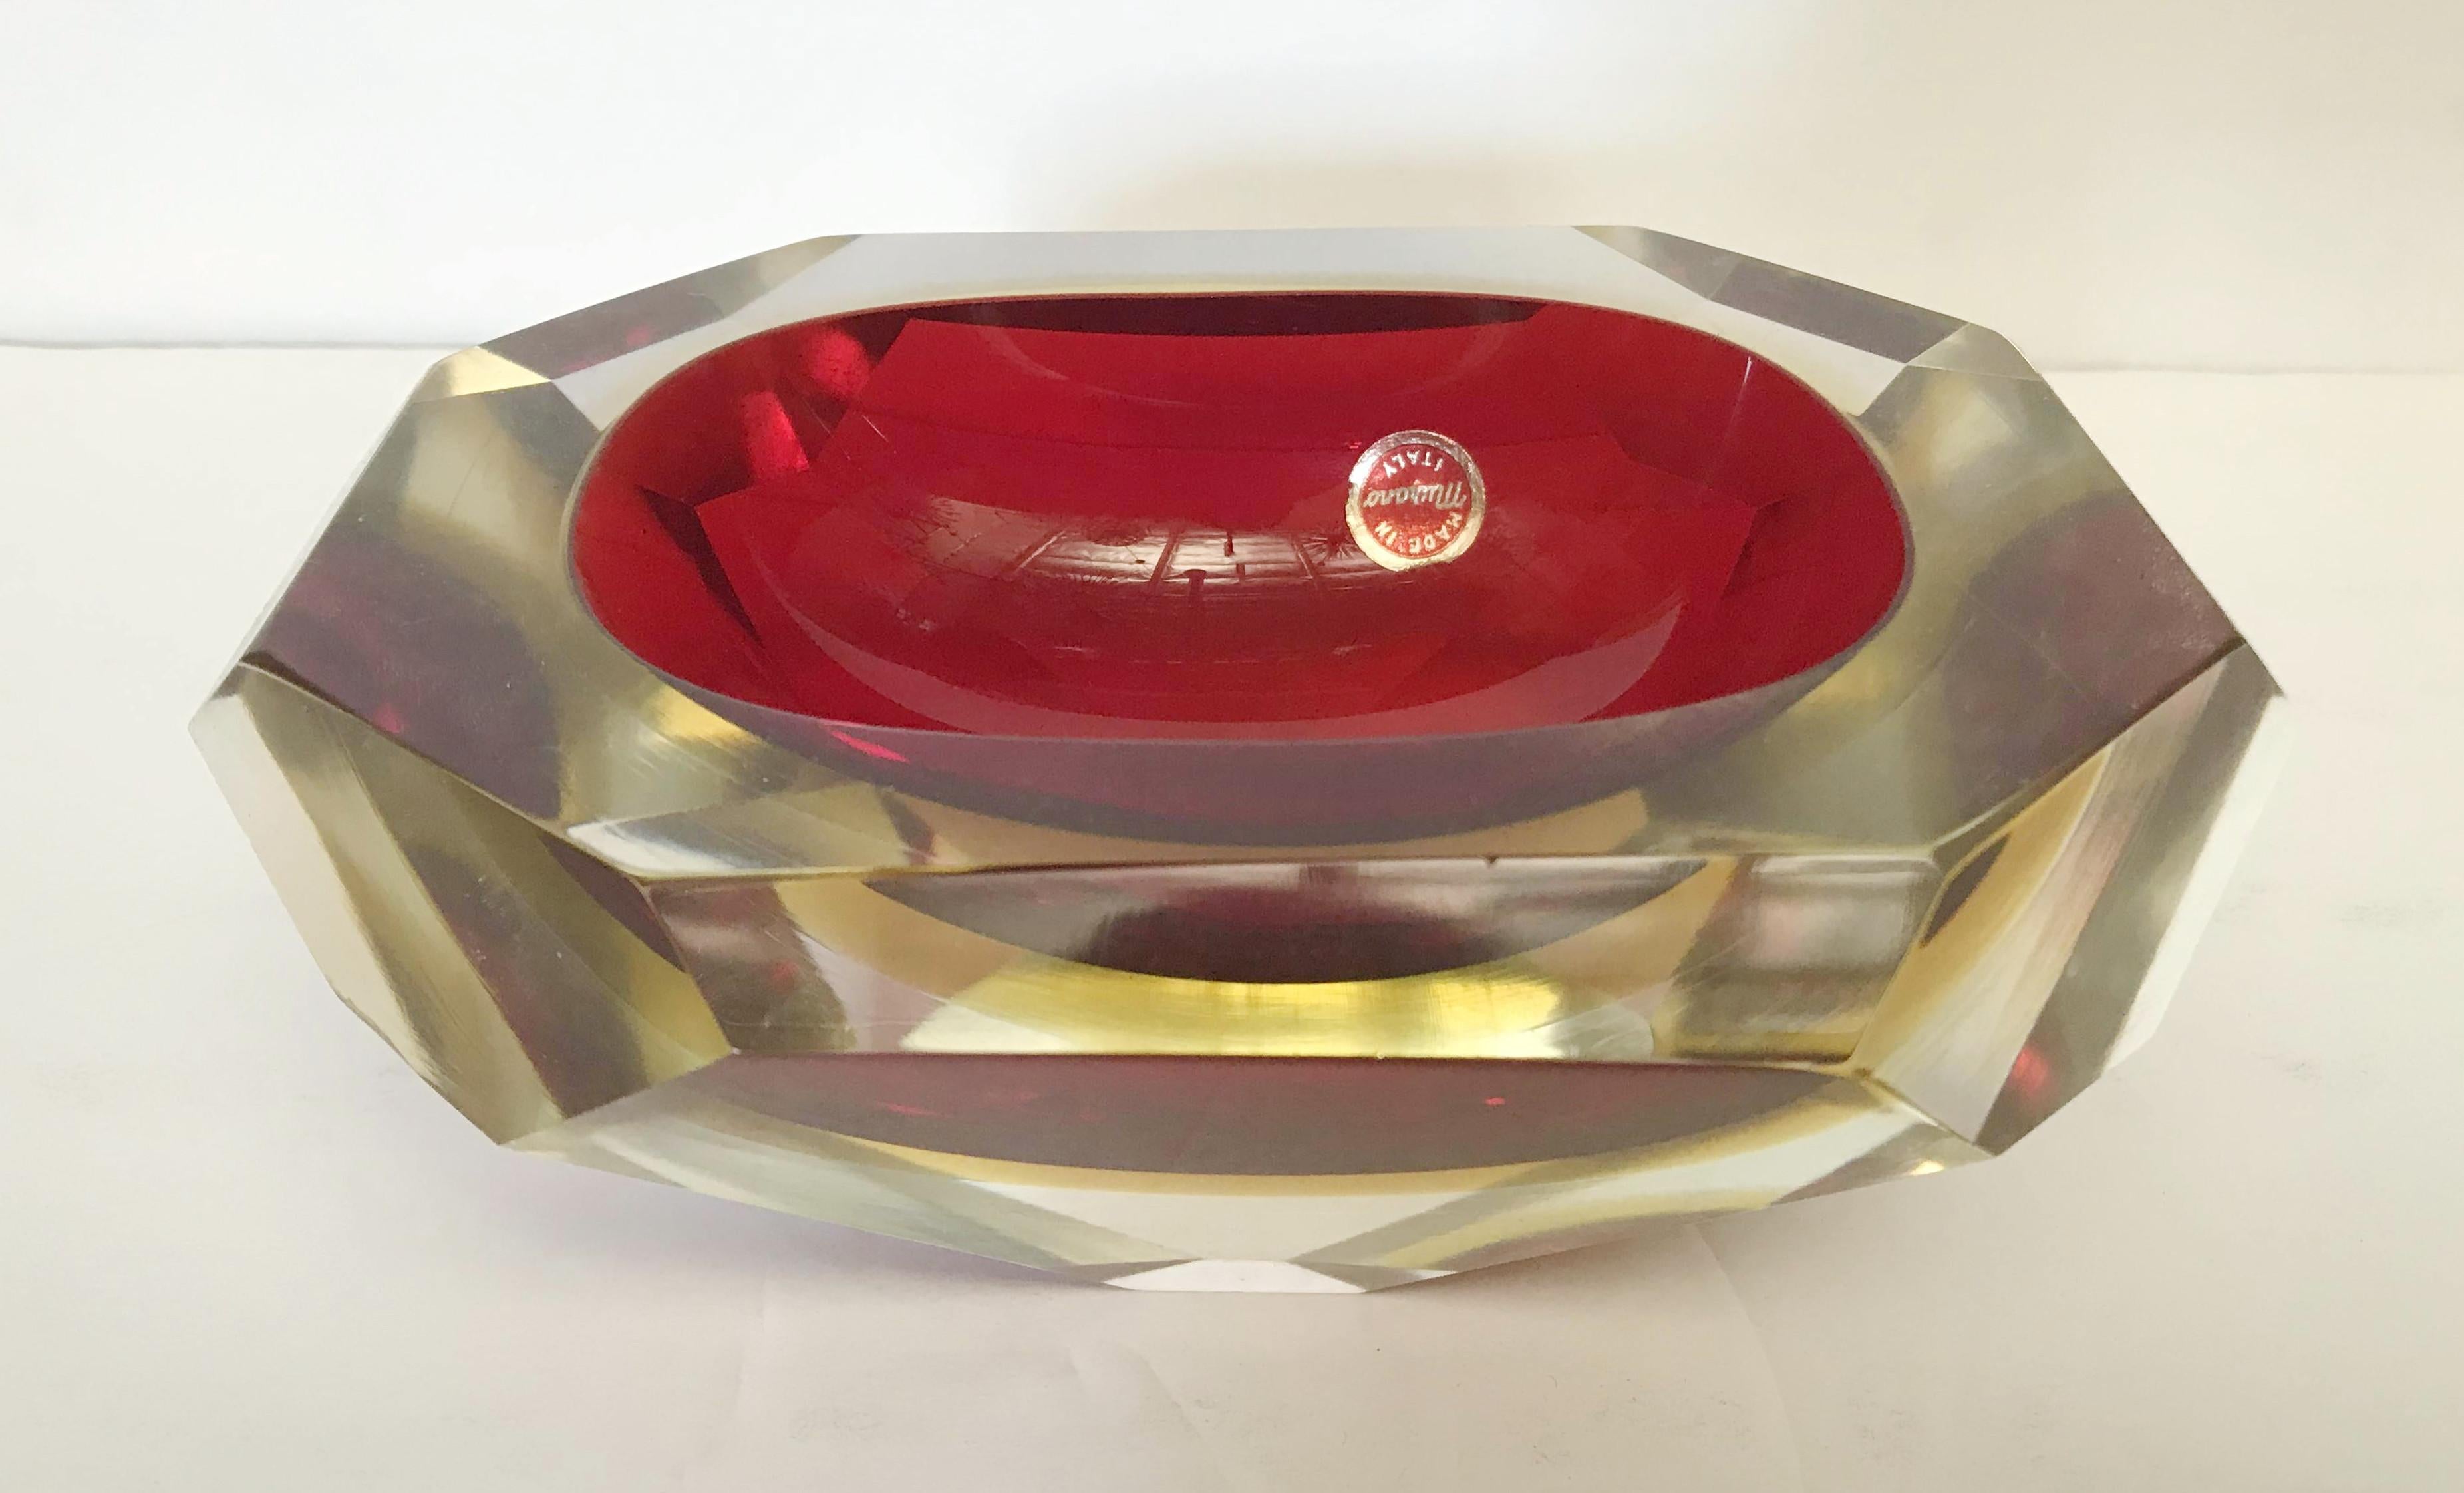 Vintage Italian red faceted Murano glass bowl blown in Sommerso technique / Designed by Mandruzzato circa 1960s / Made in Italy
Original sticker on the bowl
Measures: Length 7 inches, width 5.5 inches, height 3 inches
1 in stock in Palm Springs